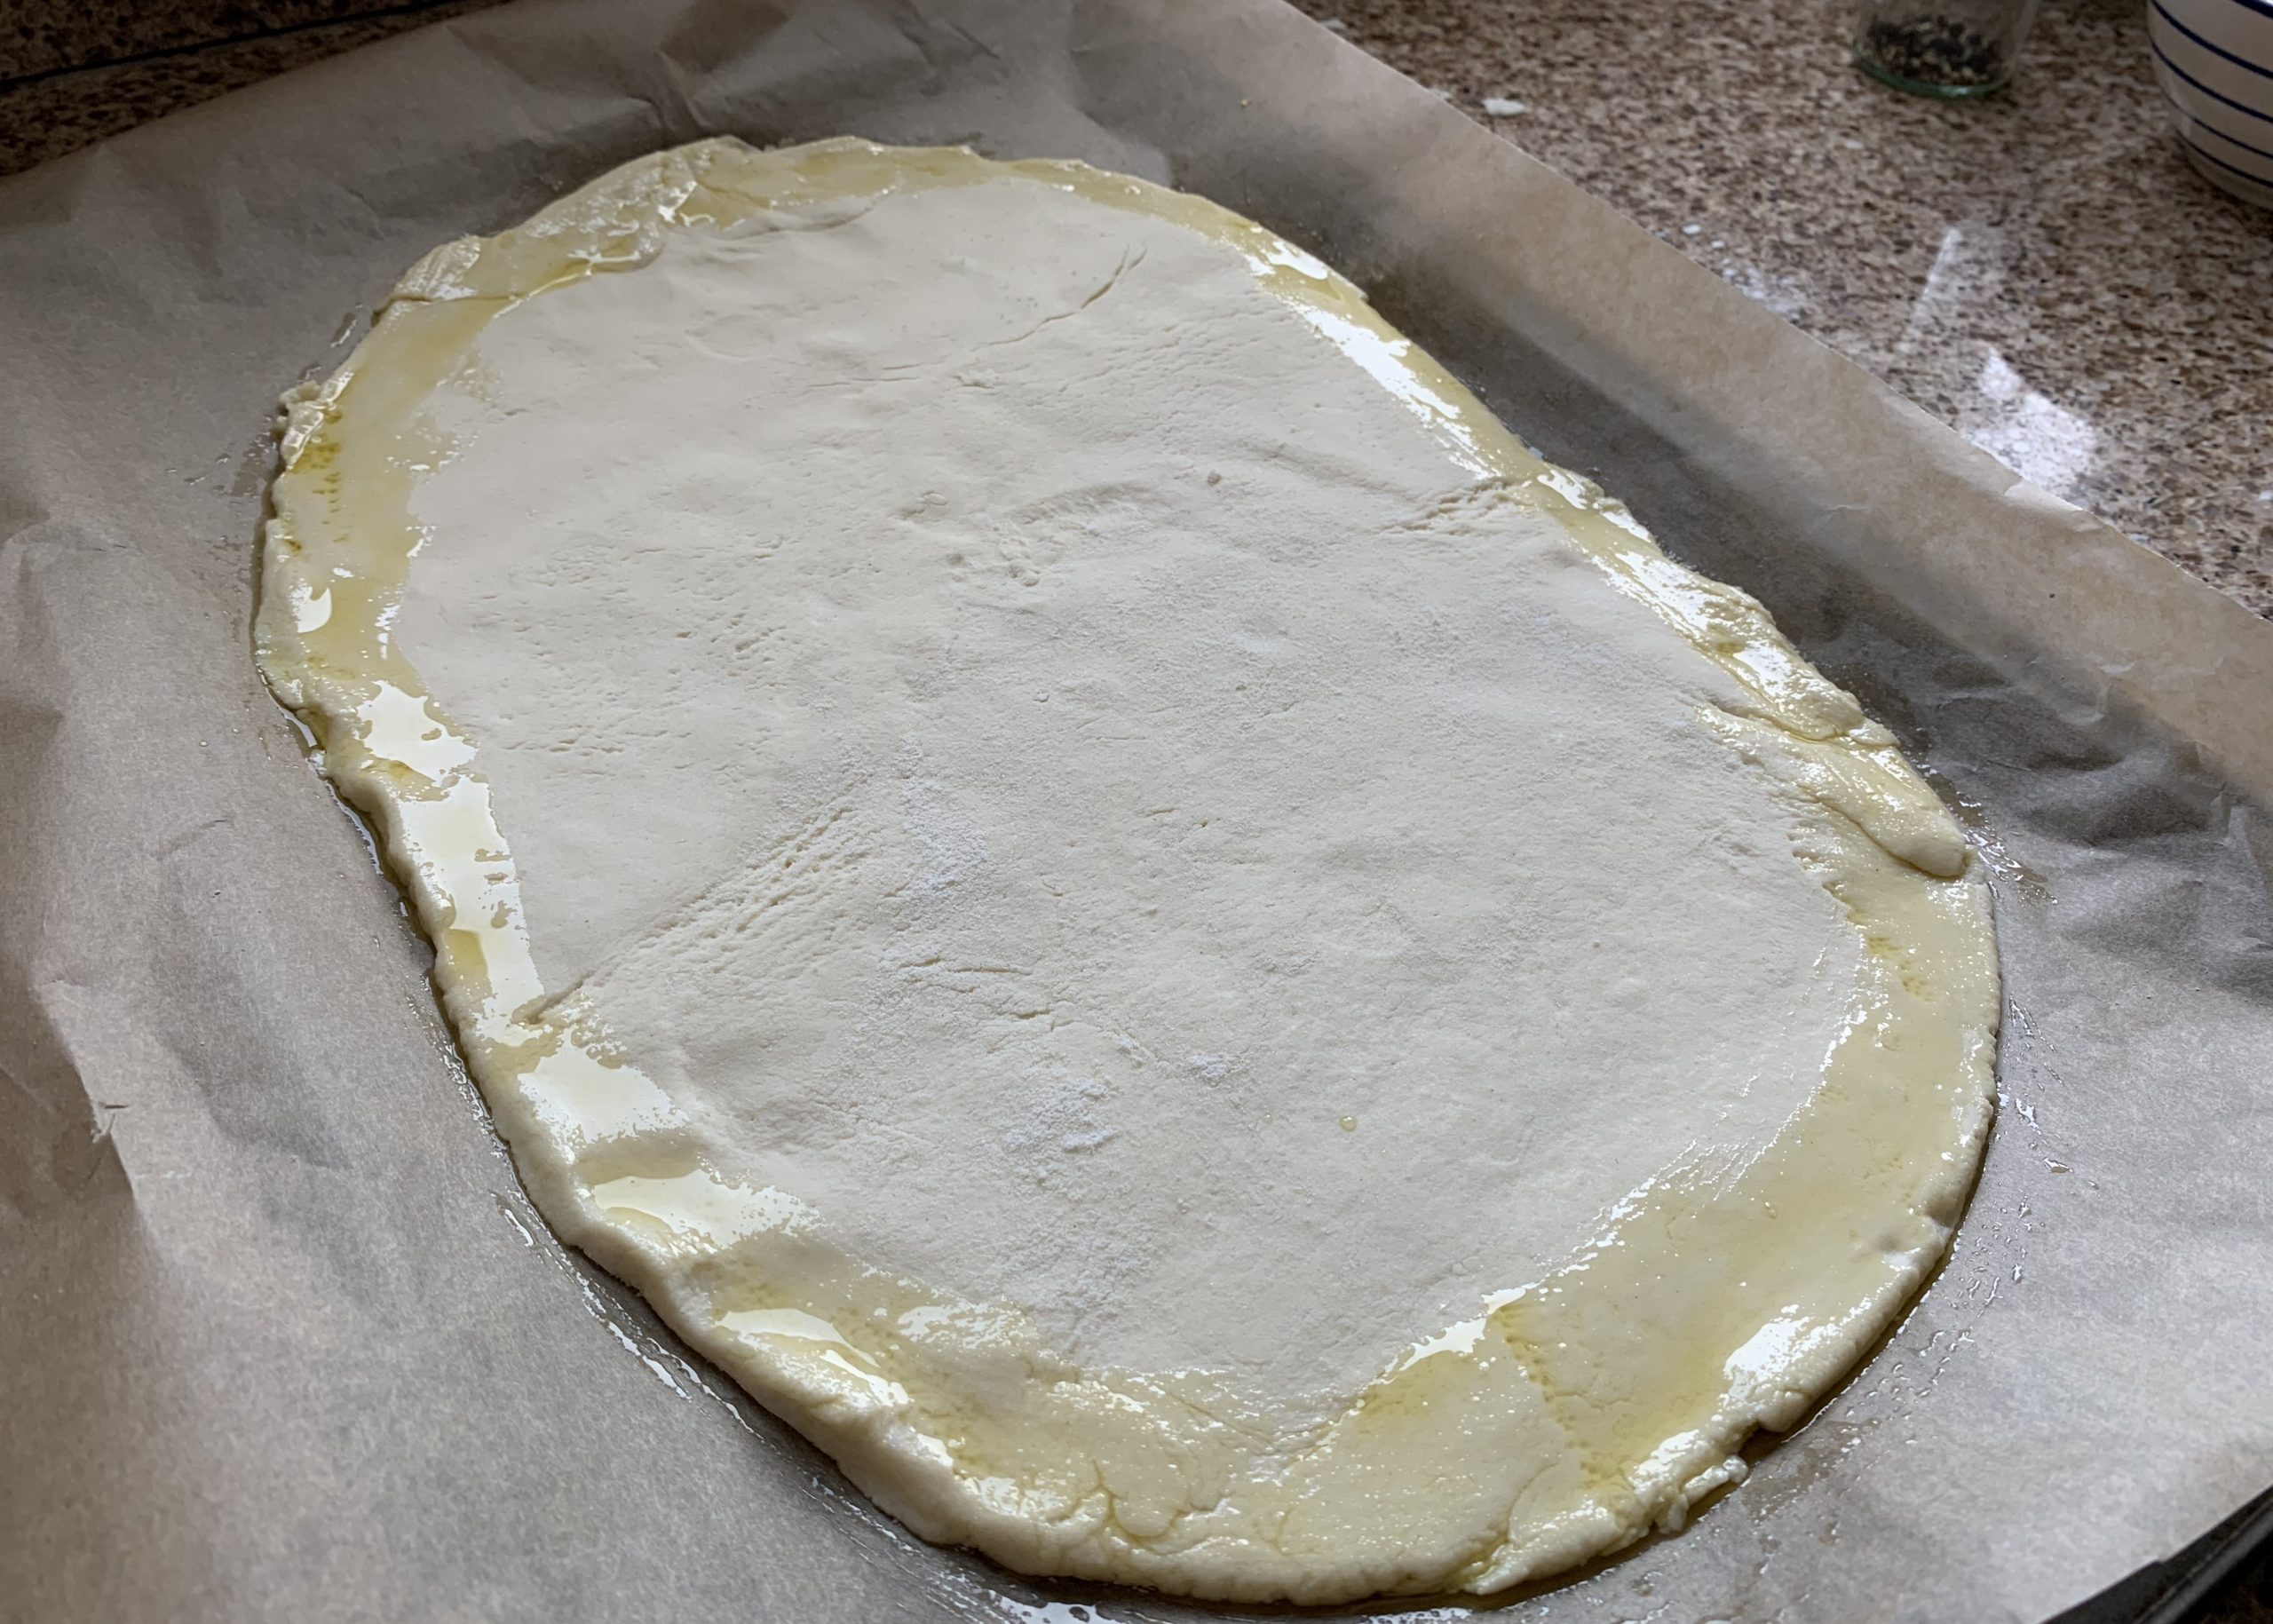 Gluten free pizza dough brushed around the edges with olive oil